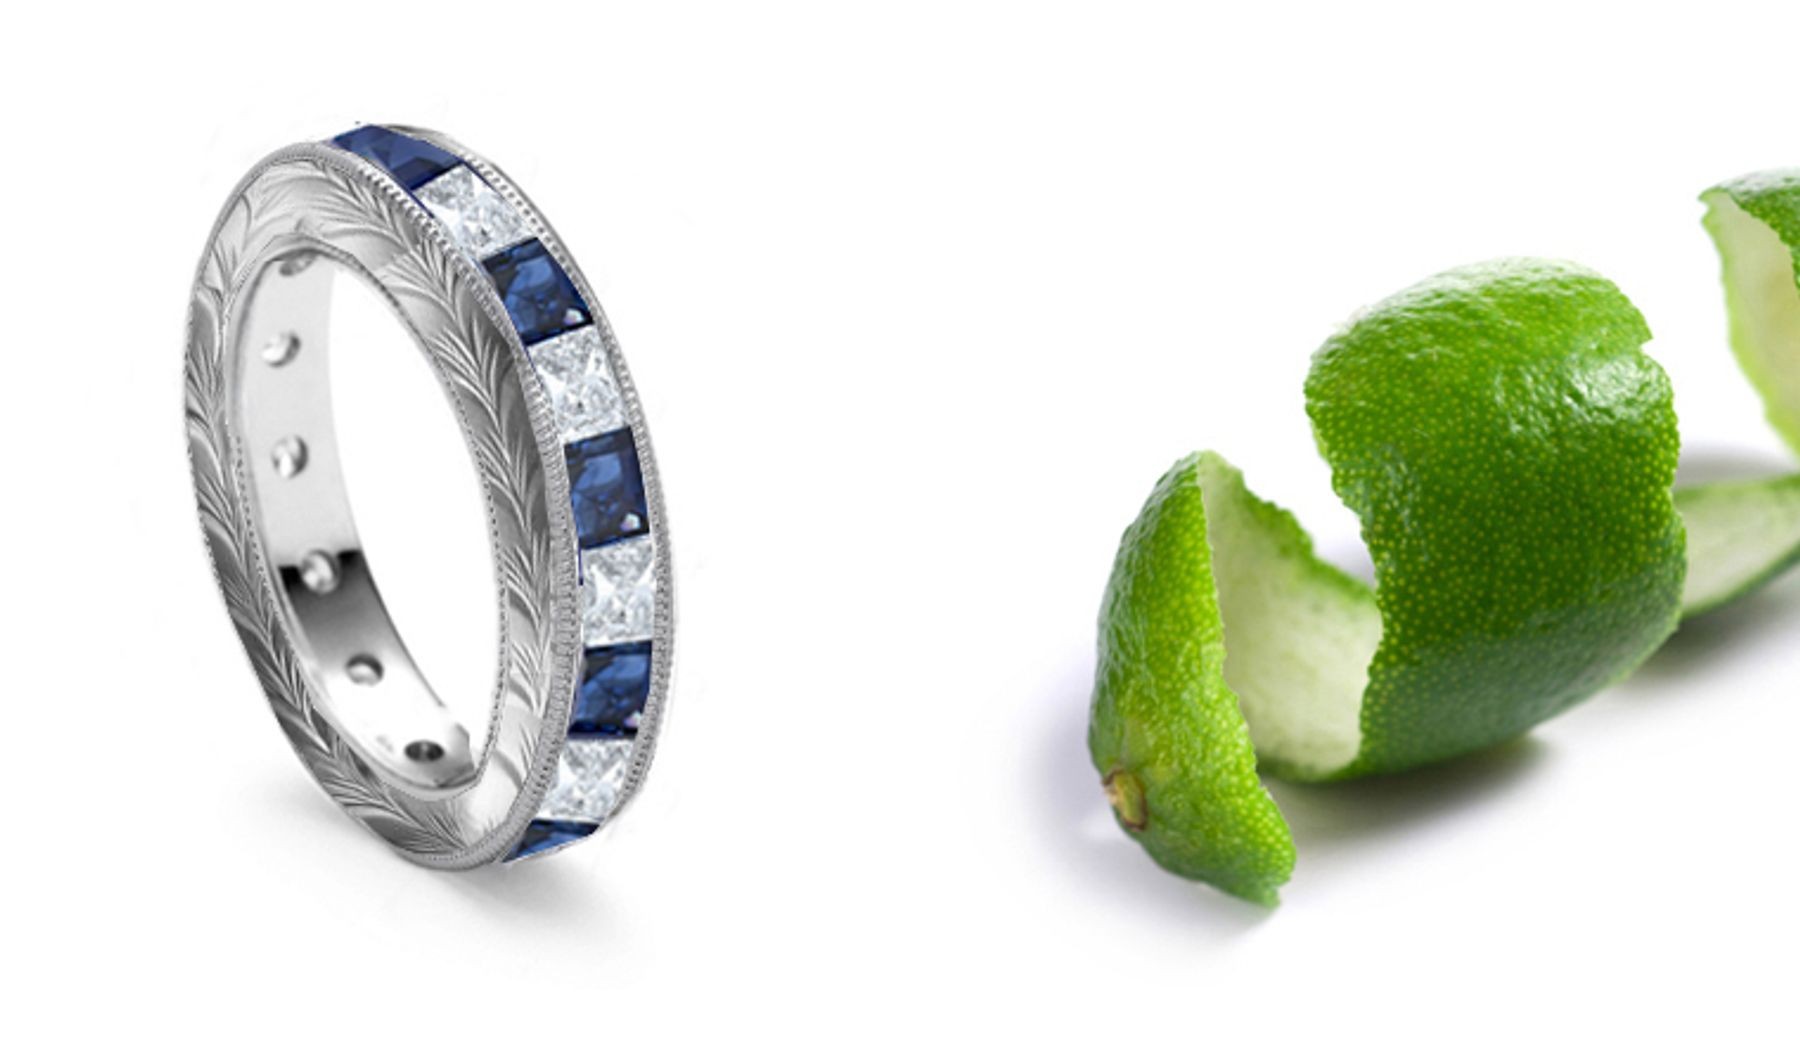 Princess Cut Sapphire Diamond Ring Engraved on the sides with foliate motif